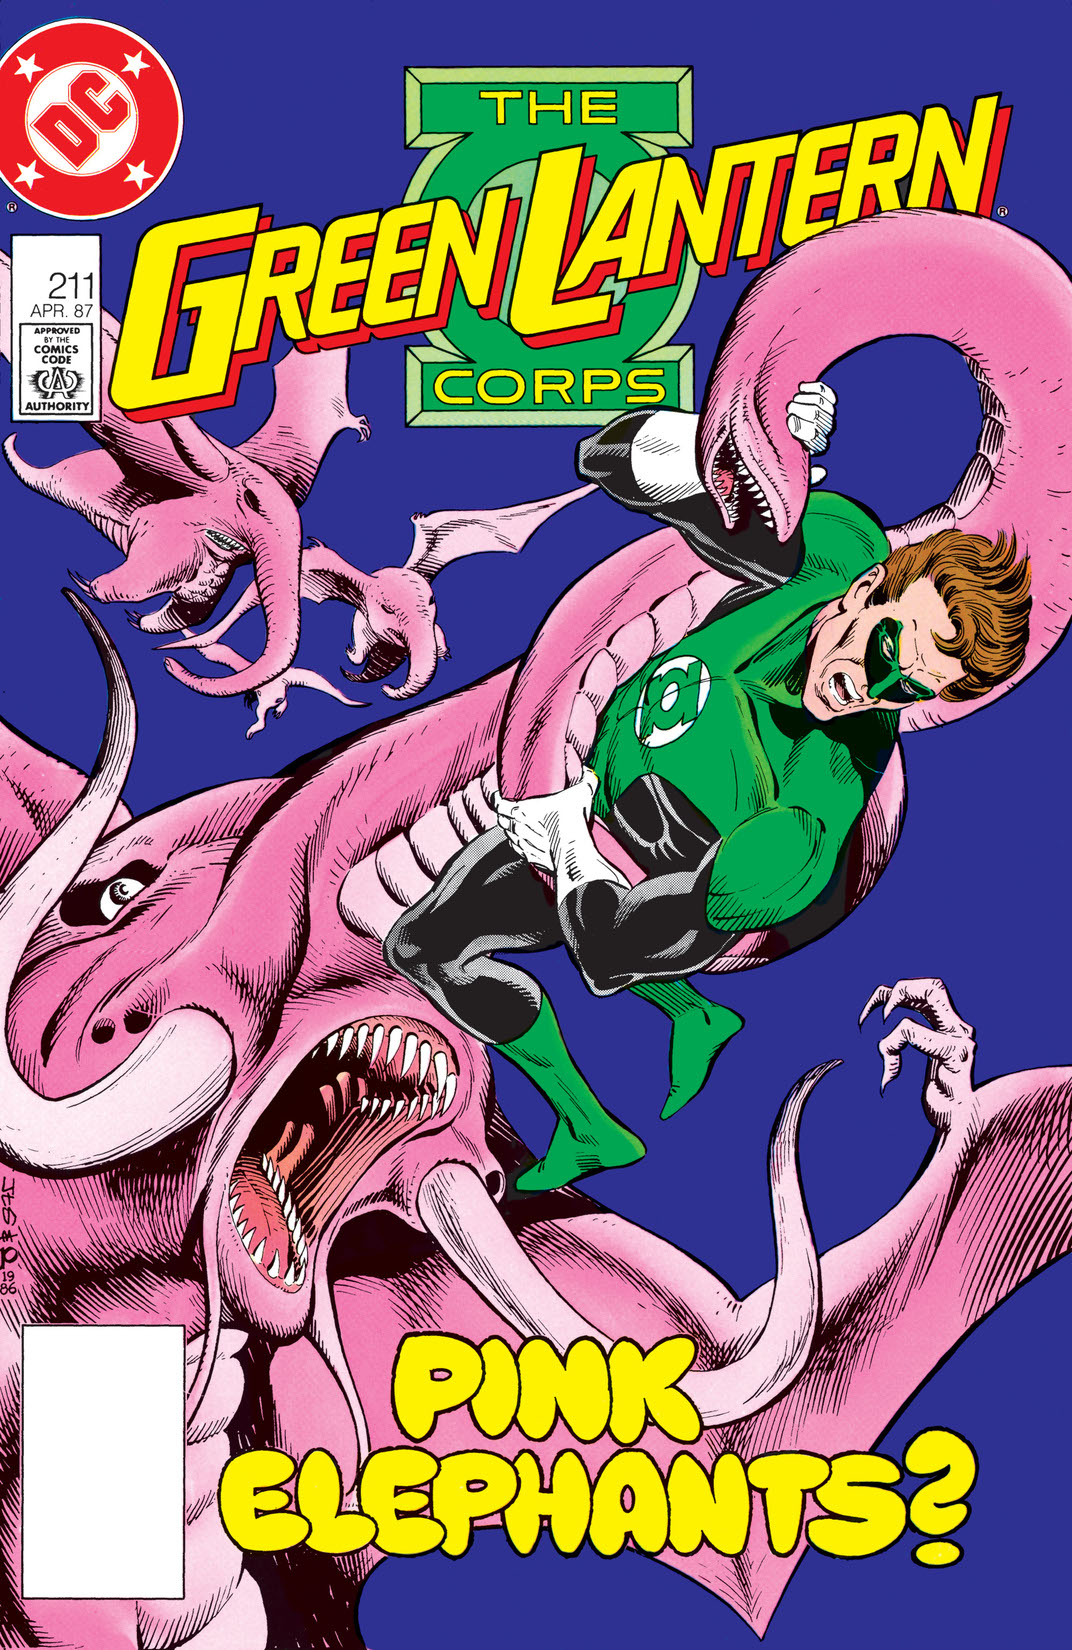 Green Lantern Corps (1986-) #211 preview images